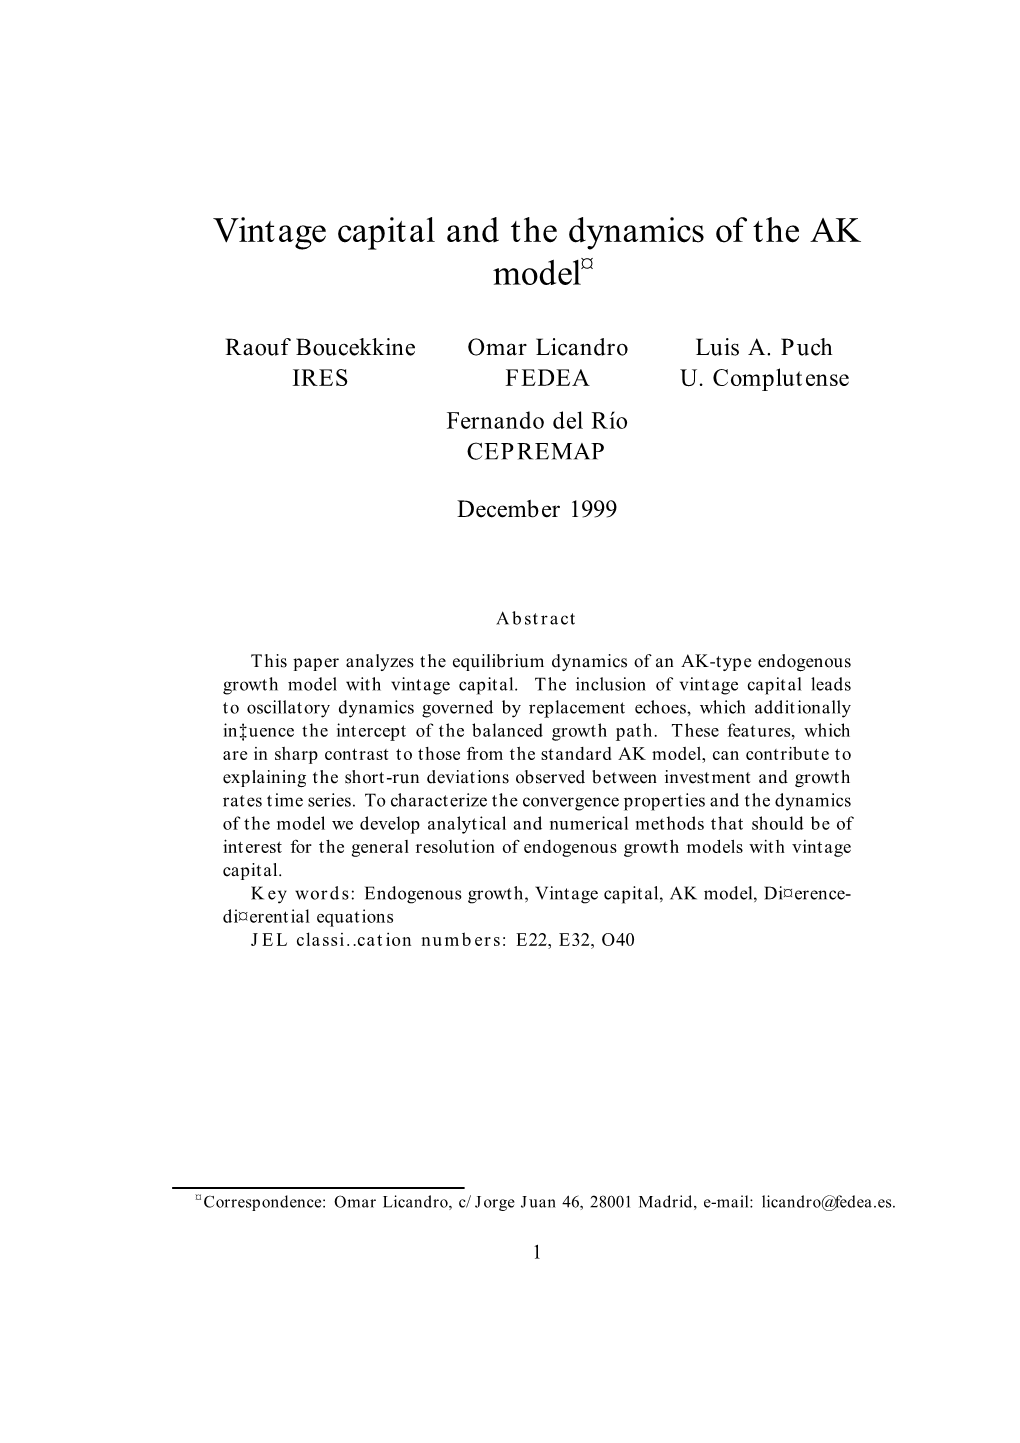 Vintage Capital and the Dynamics of the AK Model¤